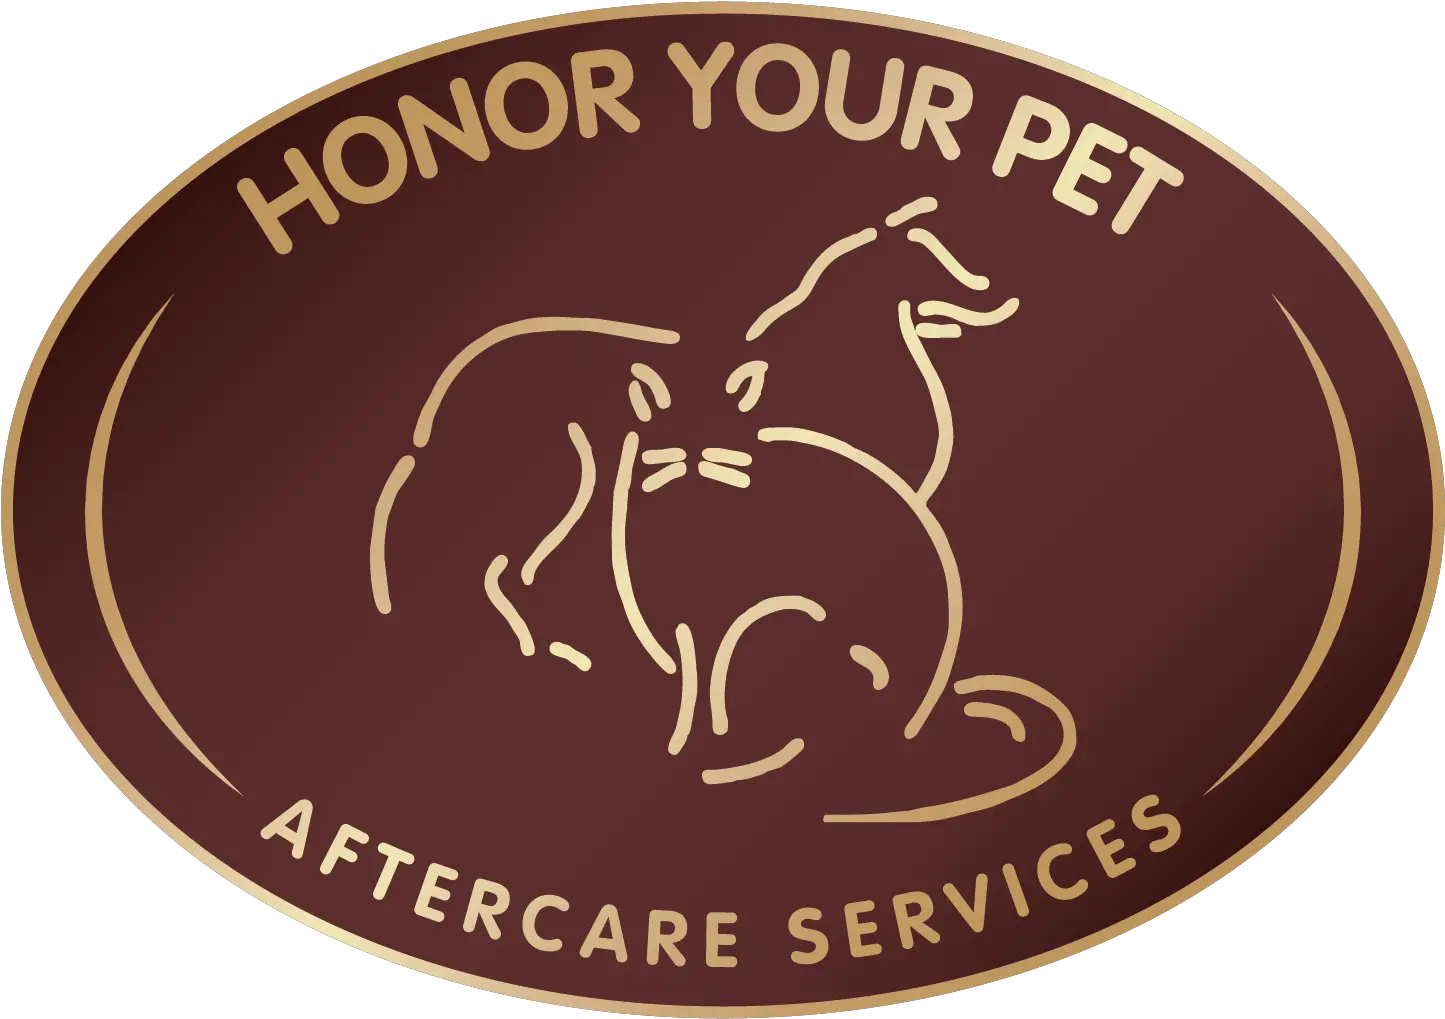 Honor Your Pet Aftercare Services Png Logo